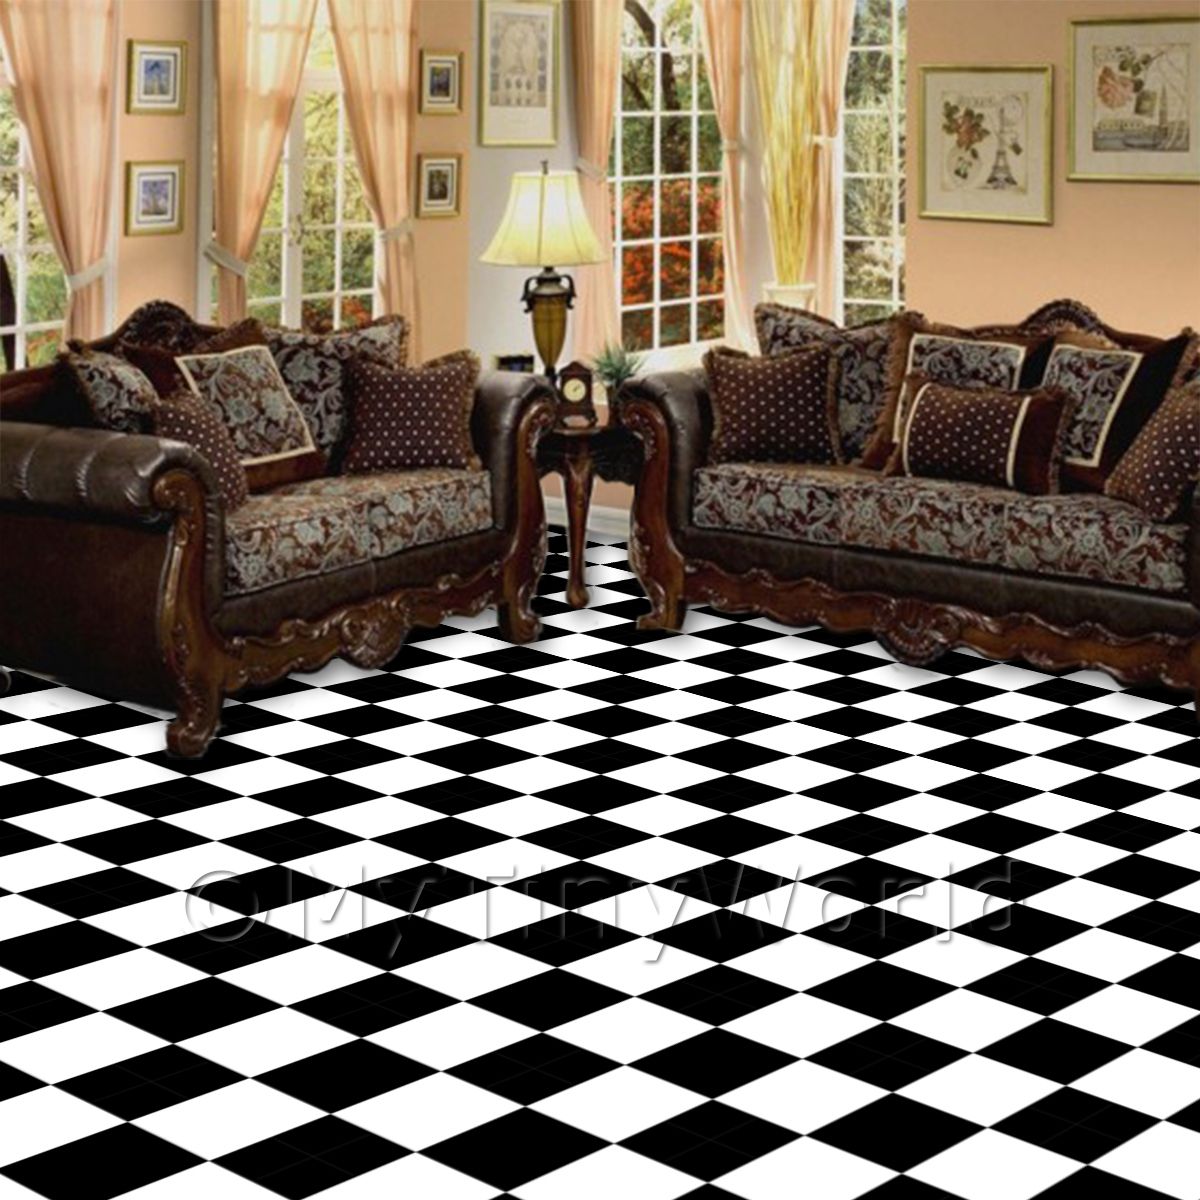 1:48th Classic Black And White Large Checkerboard Design Tile Sheet 